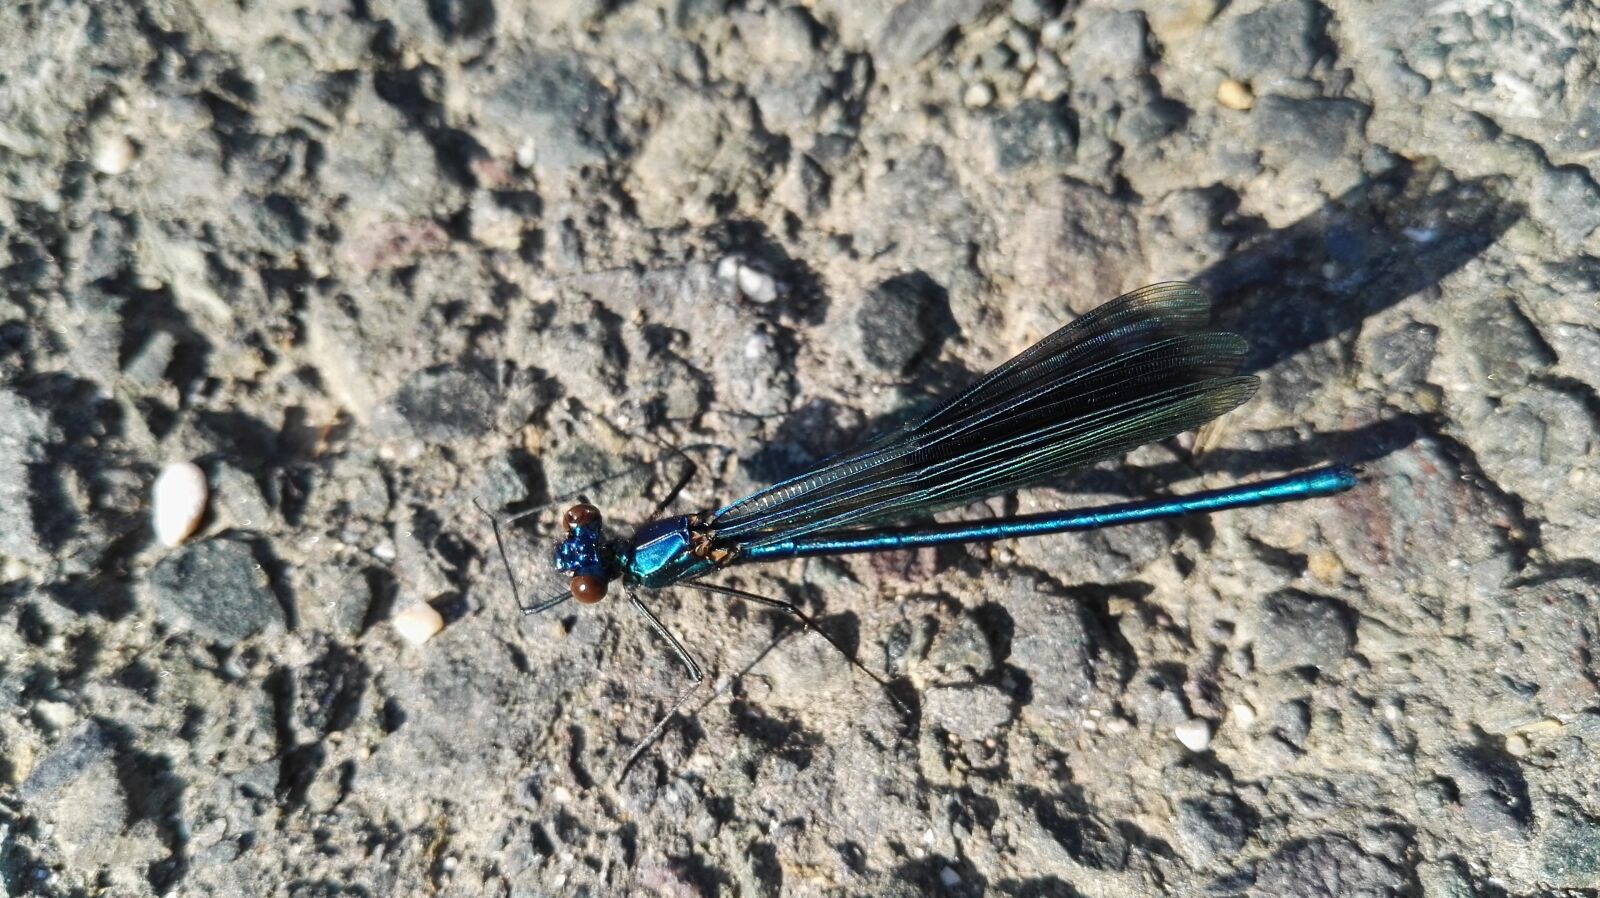 HUAWEI P8 sample photo. Dragonfly, detail, nature photography